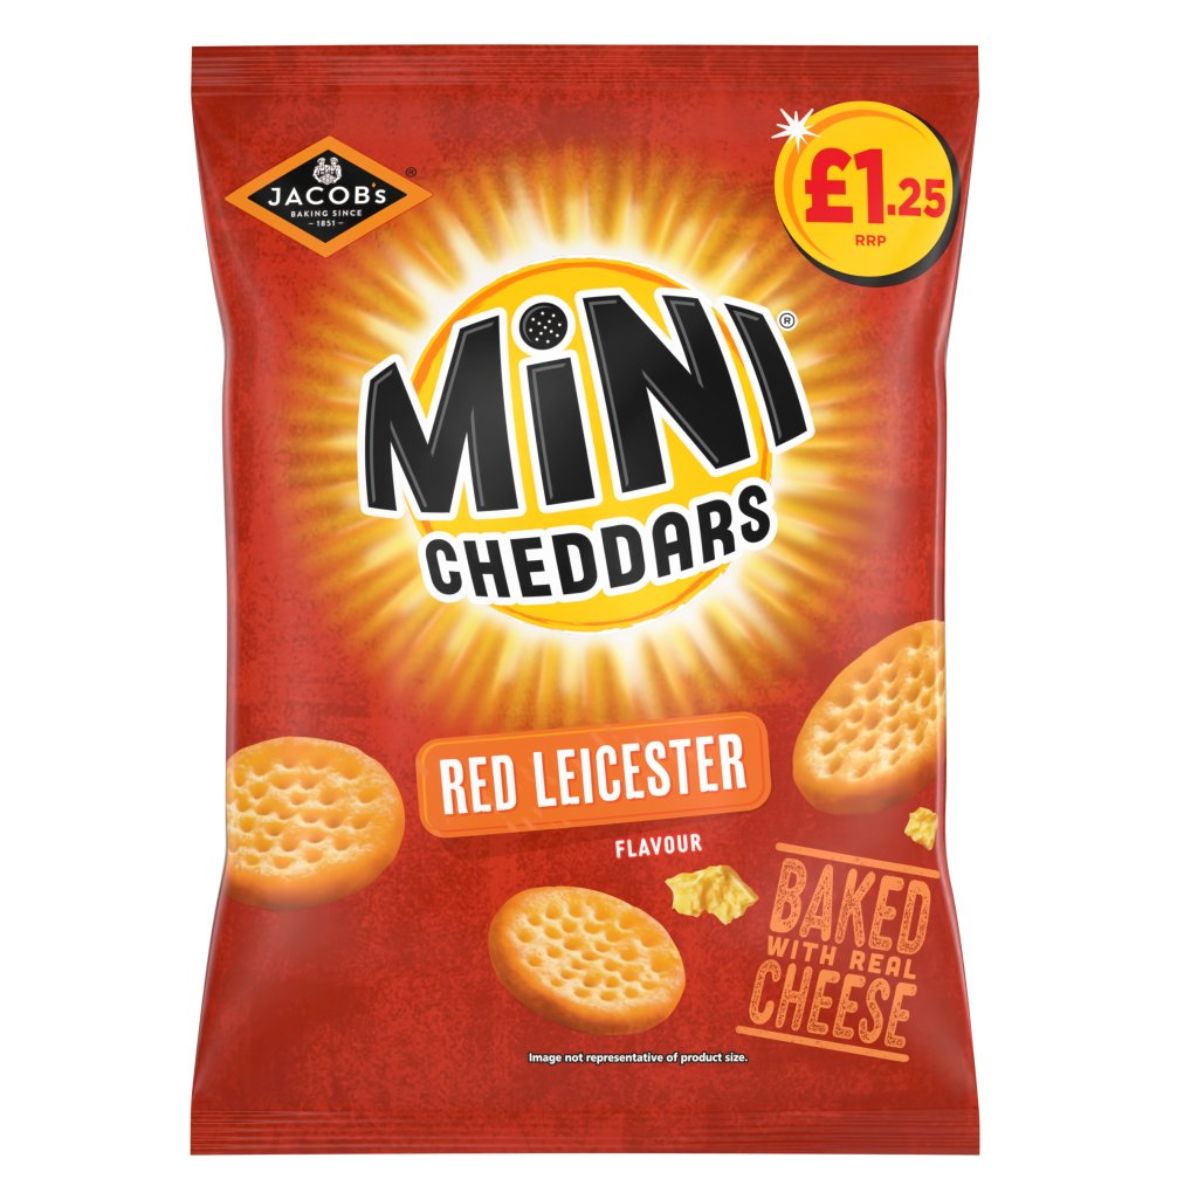 Bag of Jacobs Mini Cheddars Red Leicester Snacks - 90g, featuring the product logo and several crackers against a radiant orange background.